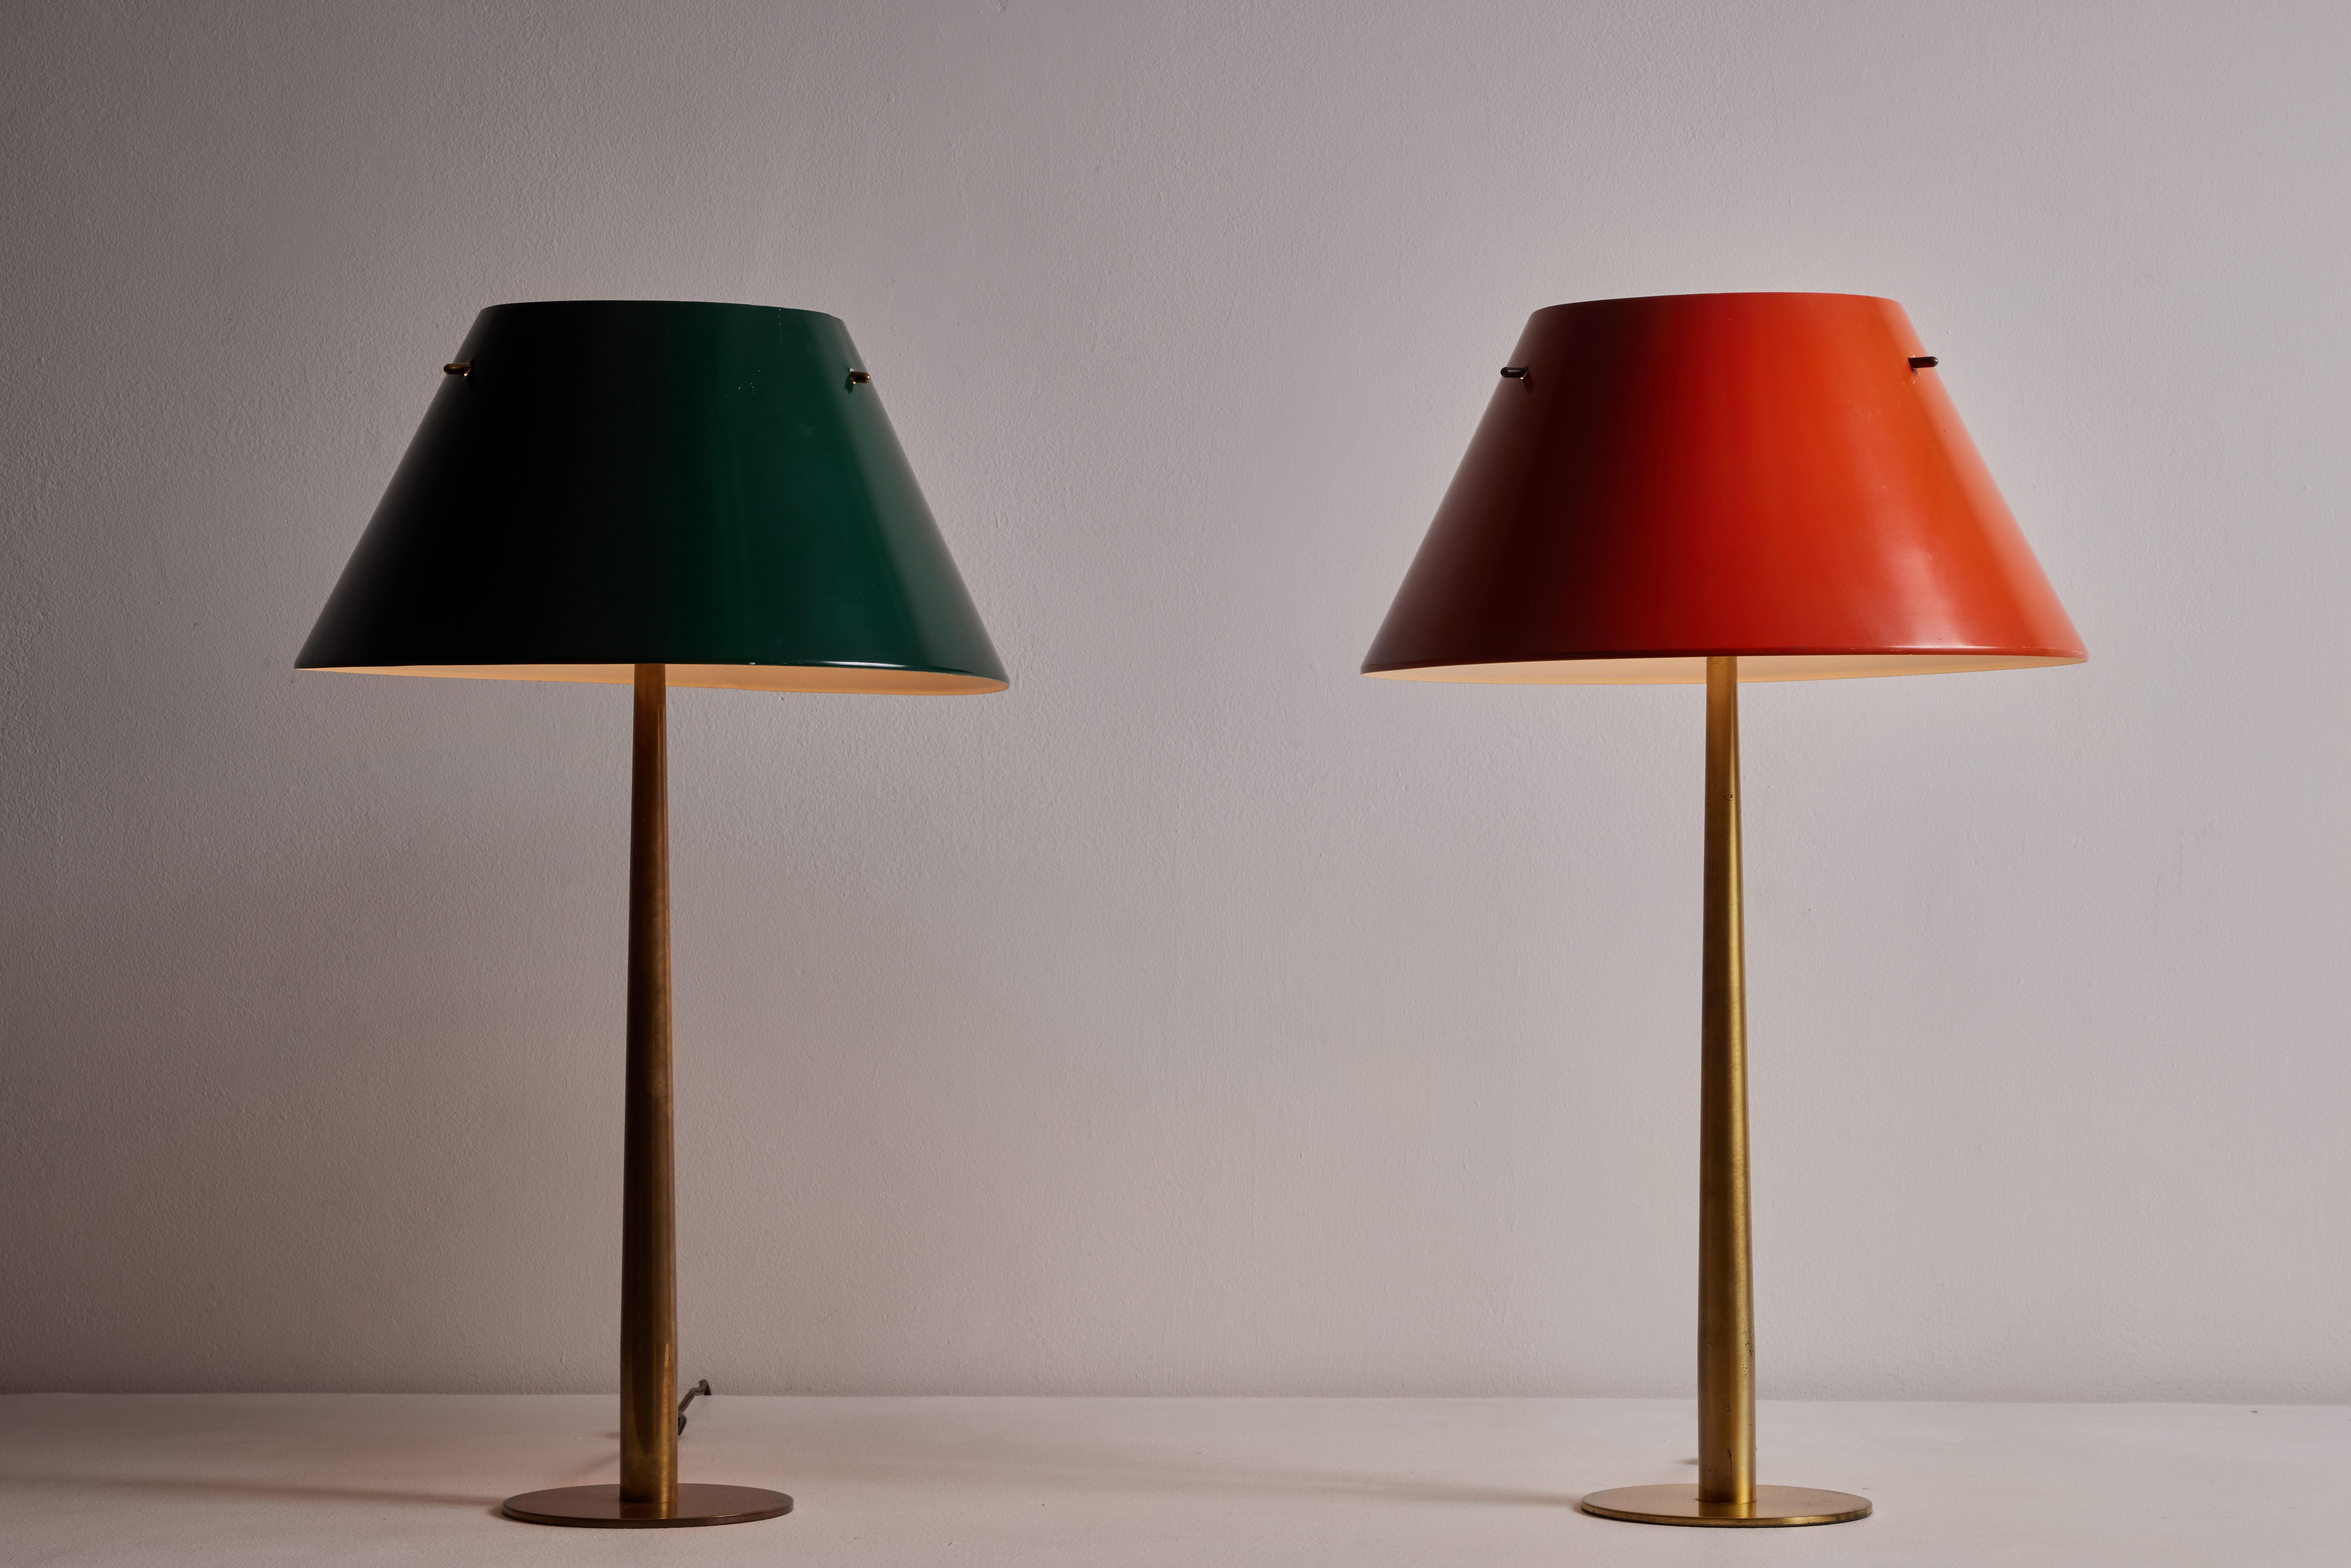 Two table lamps by Hans Agne-Jakobsson for Markaryd. Designed and manufactured in Sweden circa 1950's. Painted metal, brass. Original cord. Retains original European cord. We recommend one E27 100w maximum bulb per fixture. Bulbs provided as a one